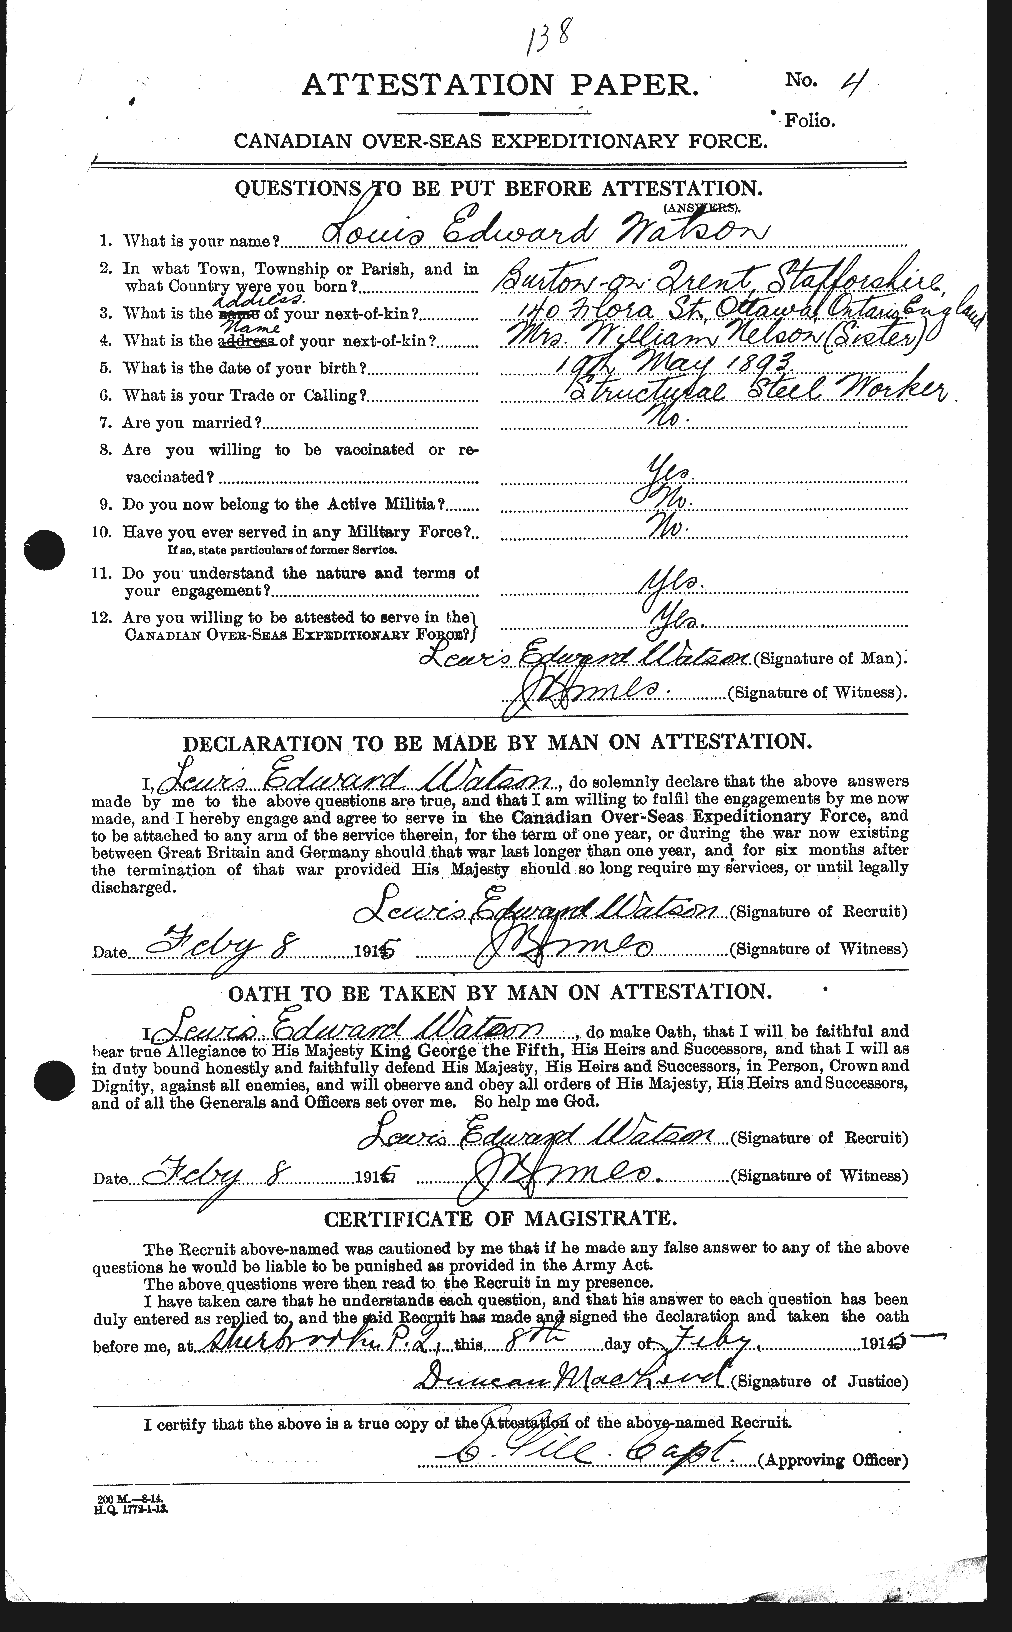 Personnel Records of the First World War - CEF 661106a